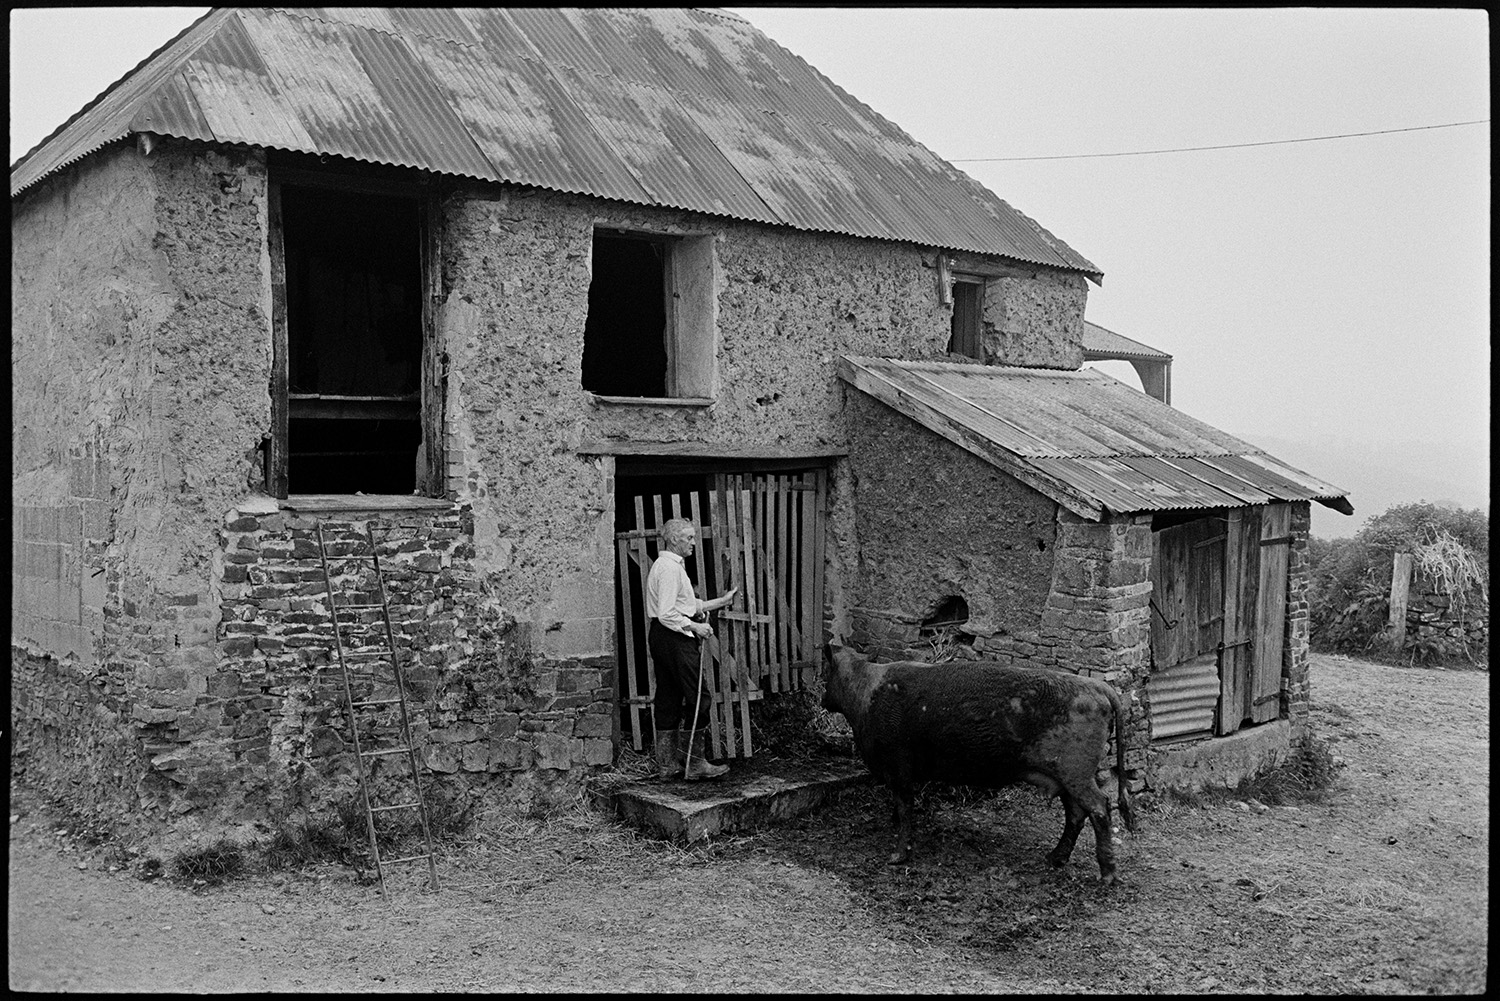 Farmer taking cows to farm, stone barns, horned cattle. 
[A man opening a wooden gate to a stone, cob and corrugated iron barn, to let a cow in, at Gosses, Hollocombe. A ladder leads up to the barn tallet.]